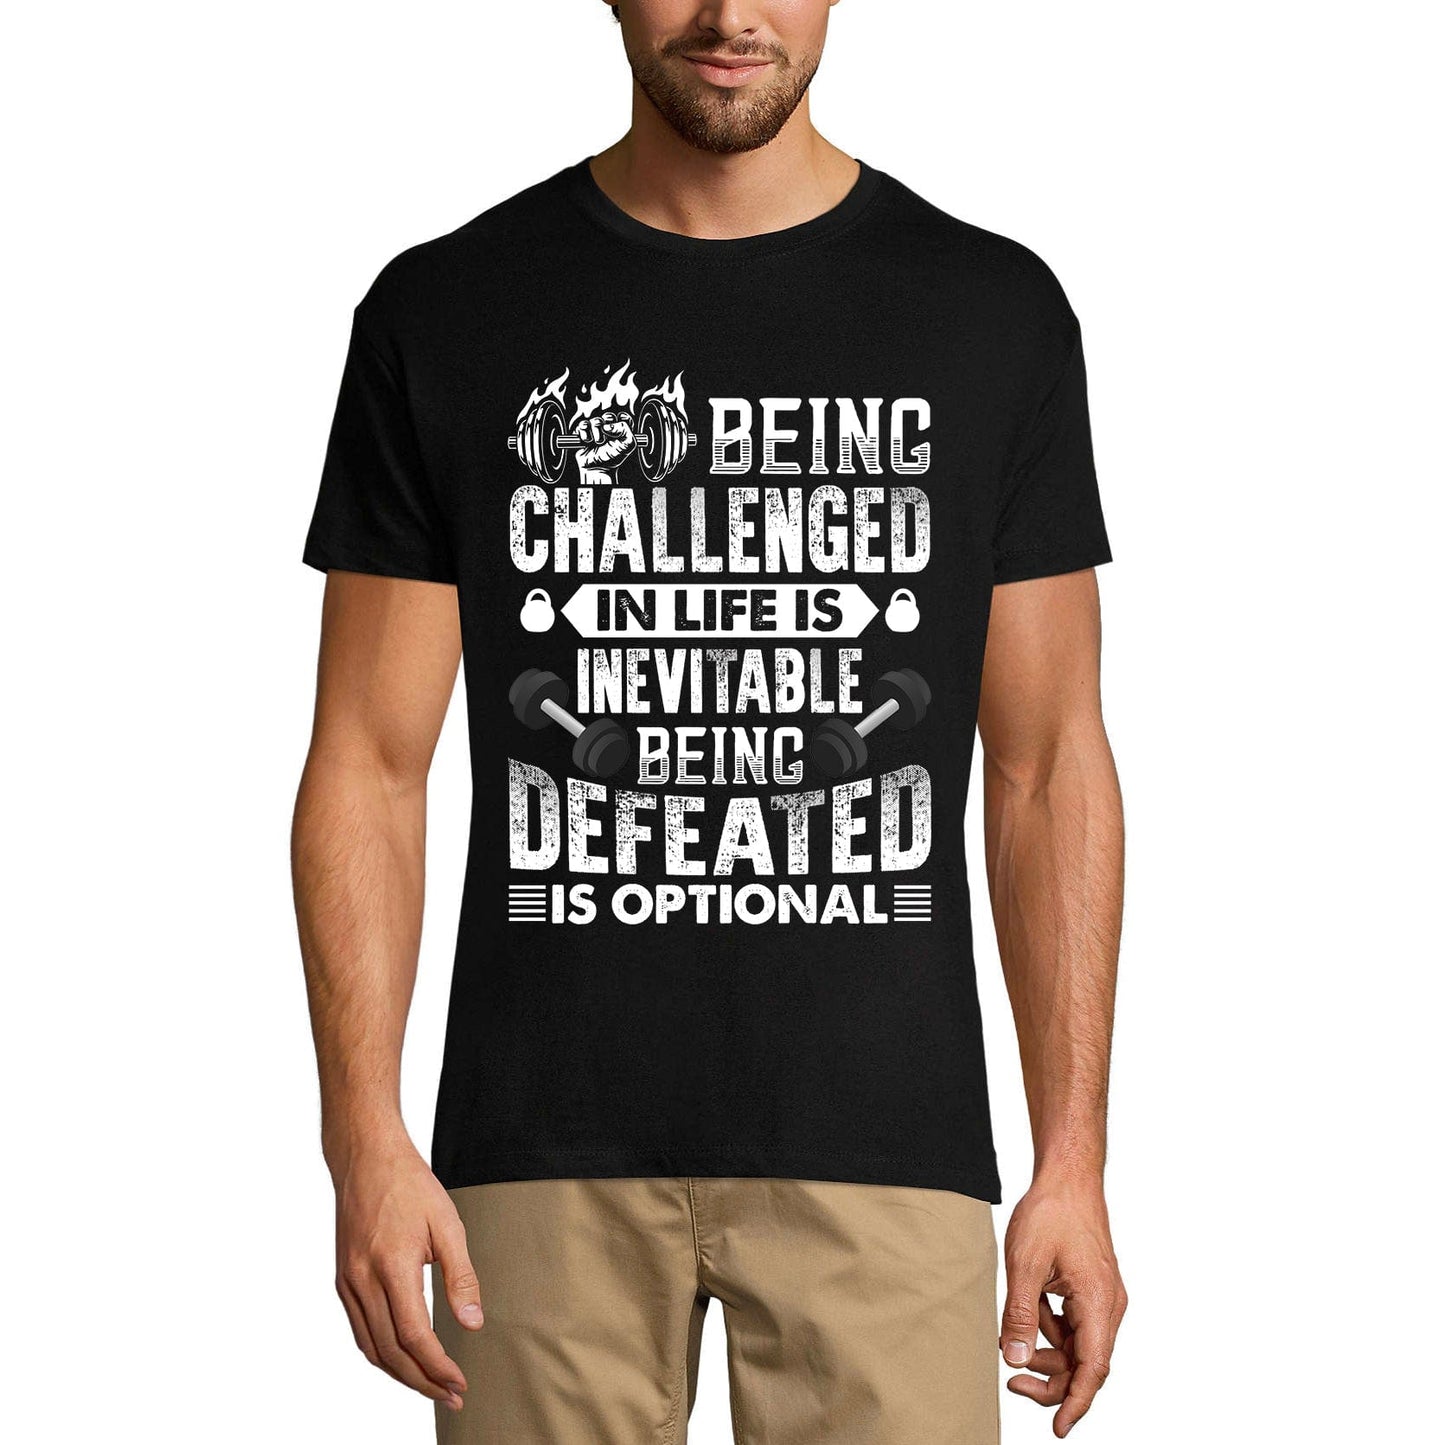 ULTRABASIC Men's T-Shirt Being Defeated is Optional - Motivational Funny Gym Shirt